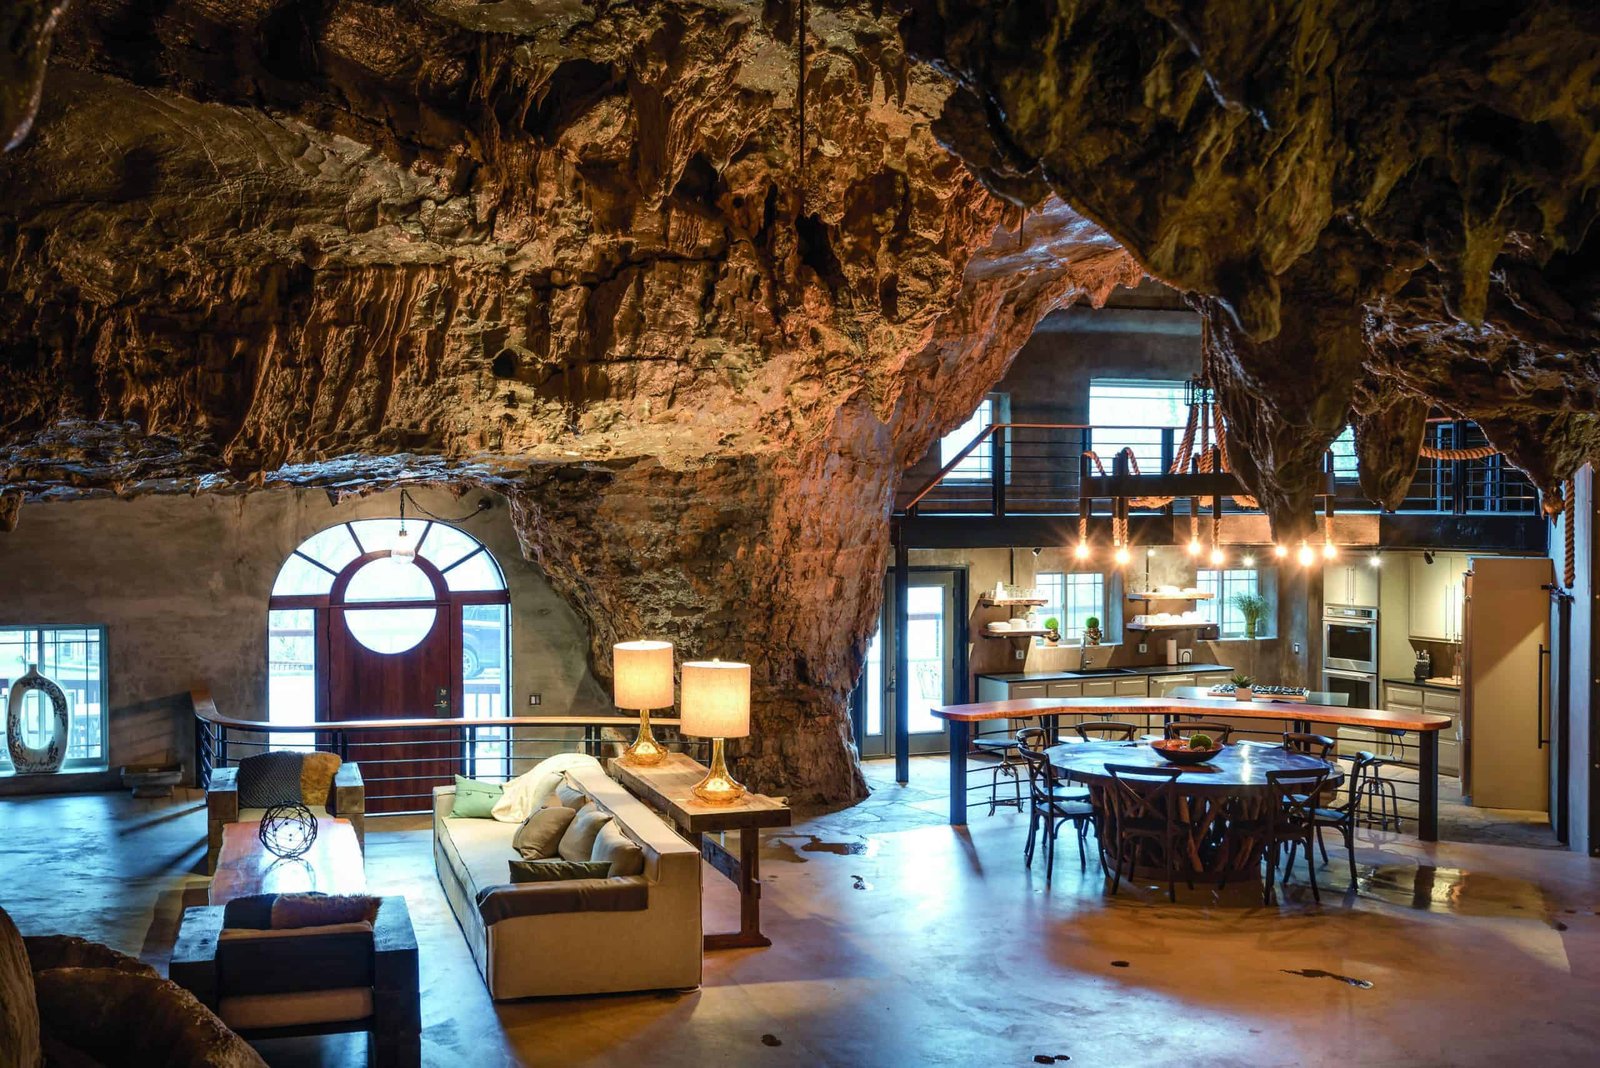 An amazing living room and dining room nestled inside a cave.